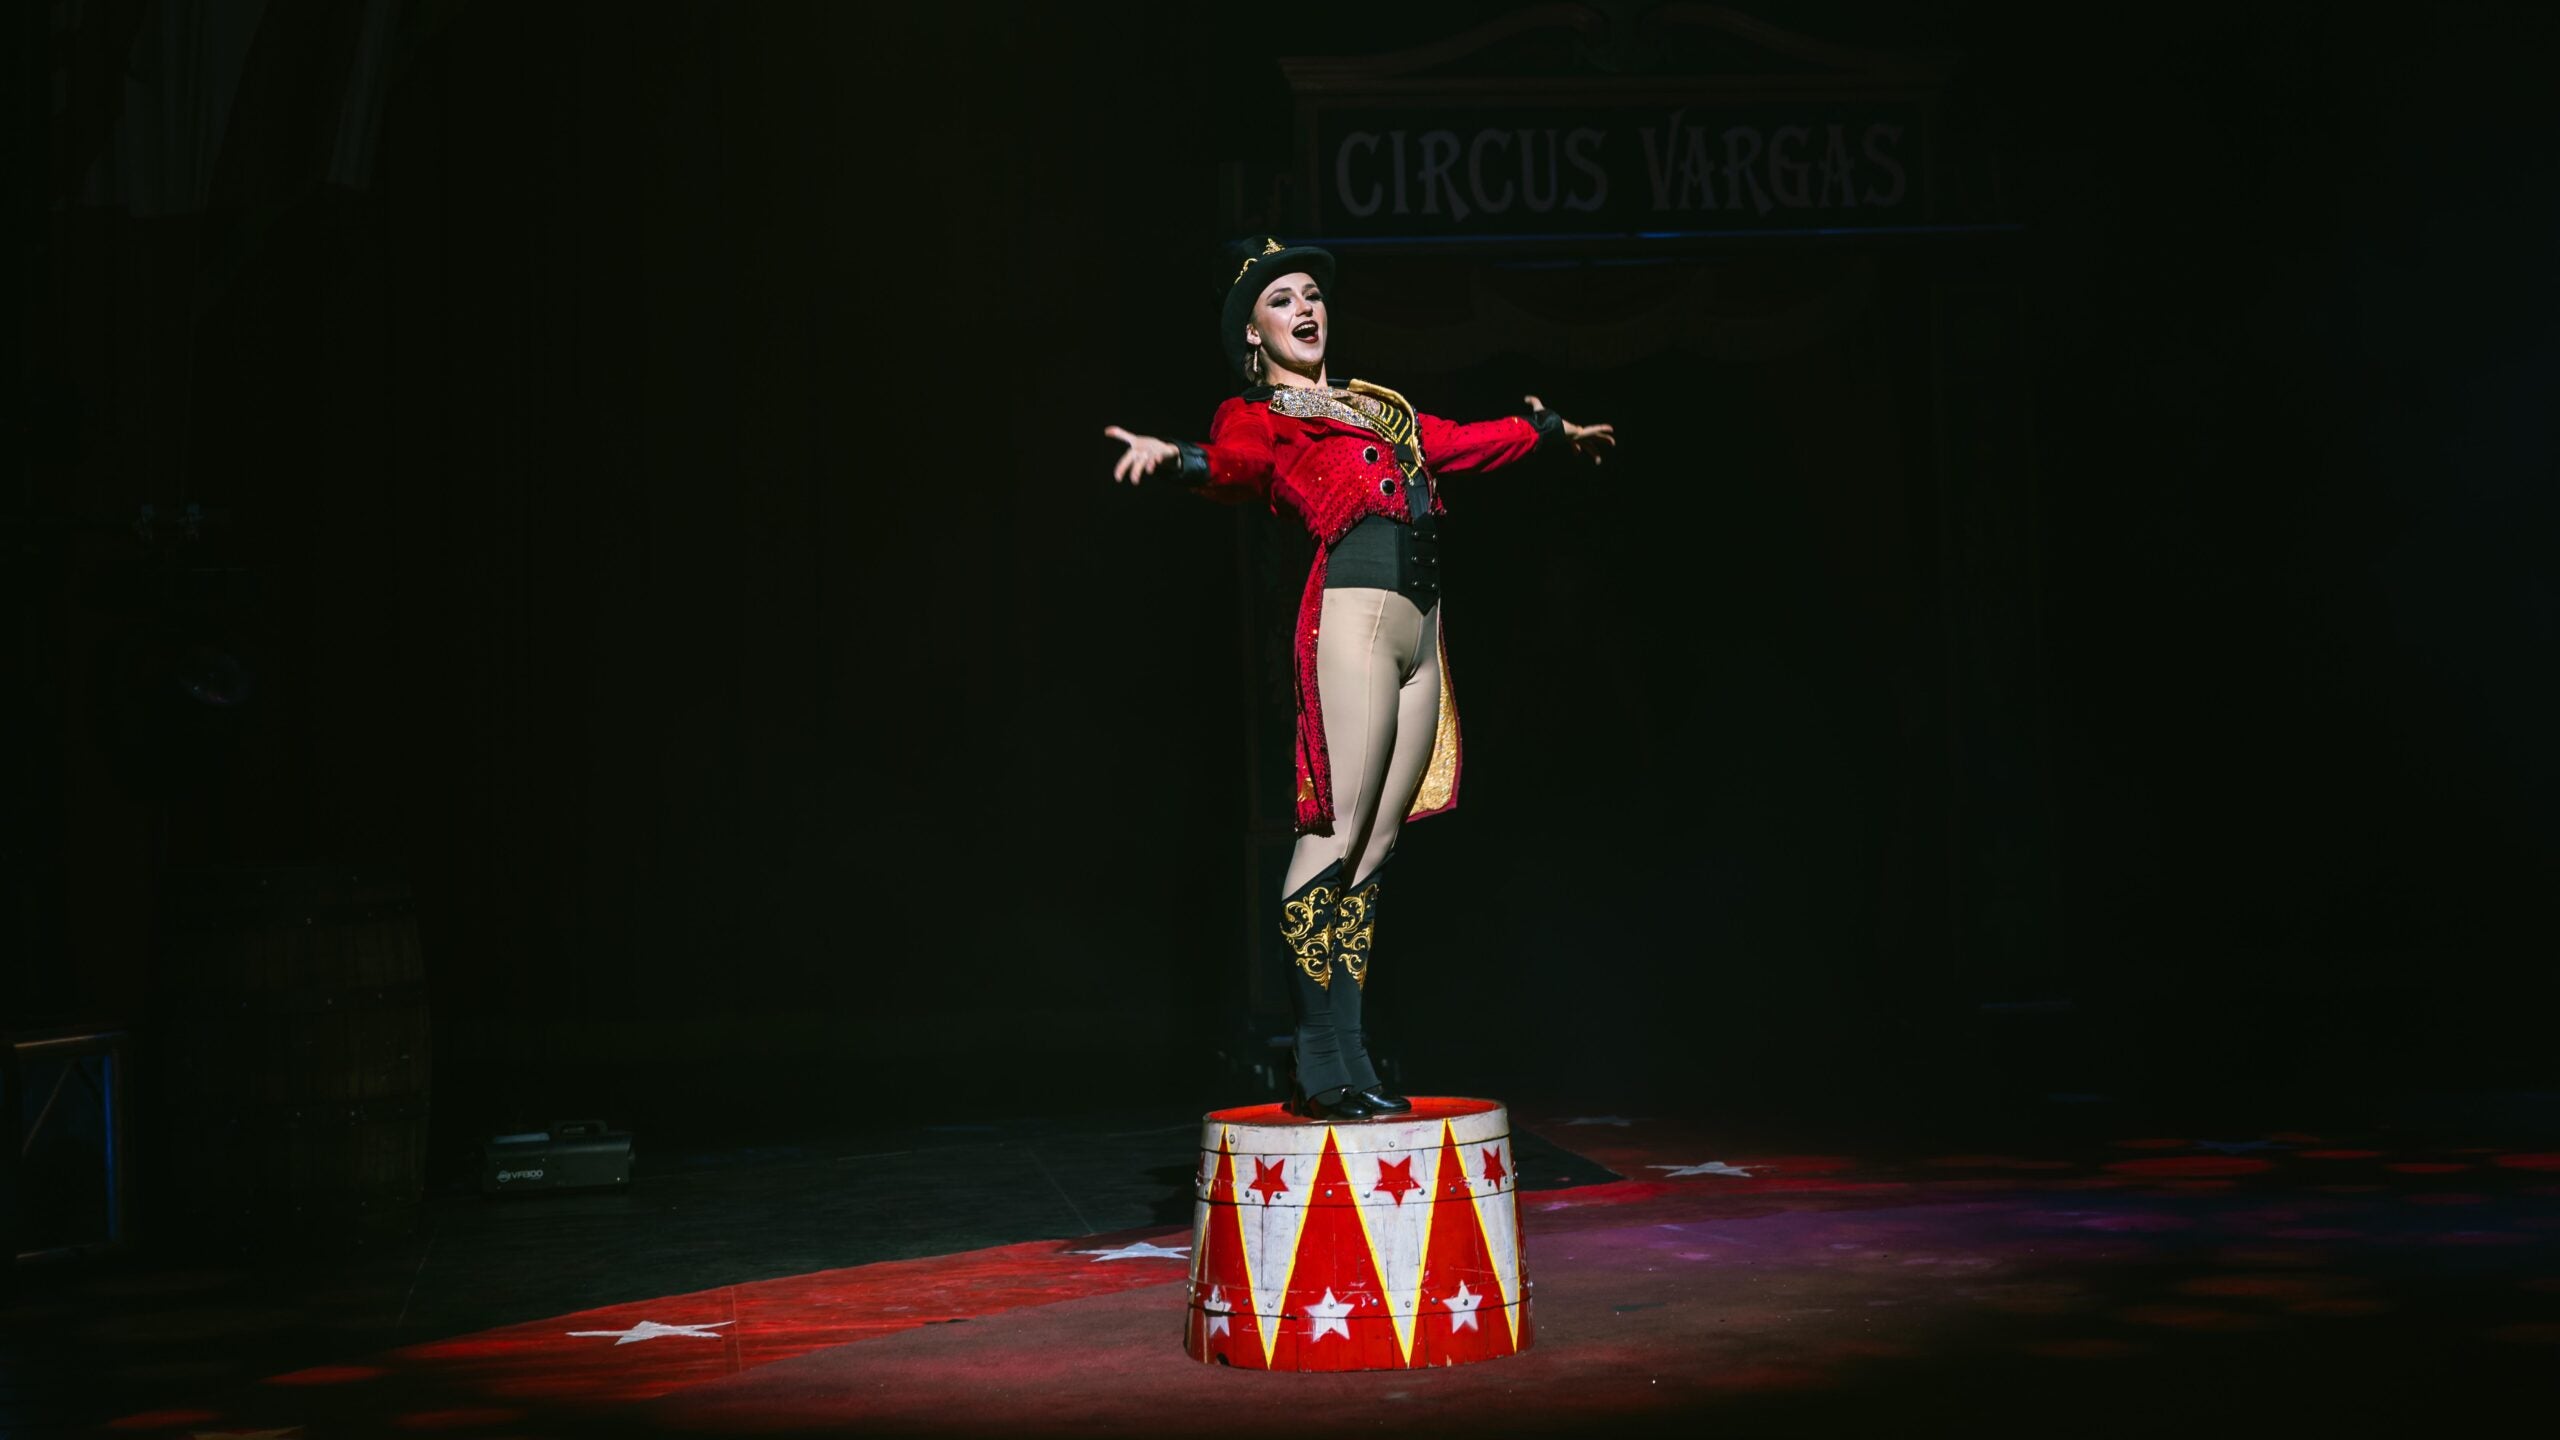 Performer Izzy Patrowicz gestures in costume standing on a barrel at the circus. 